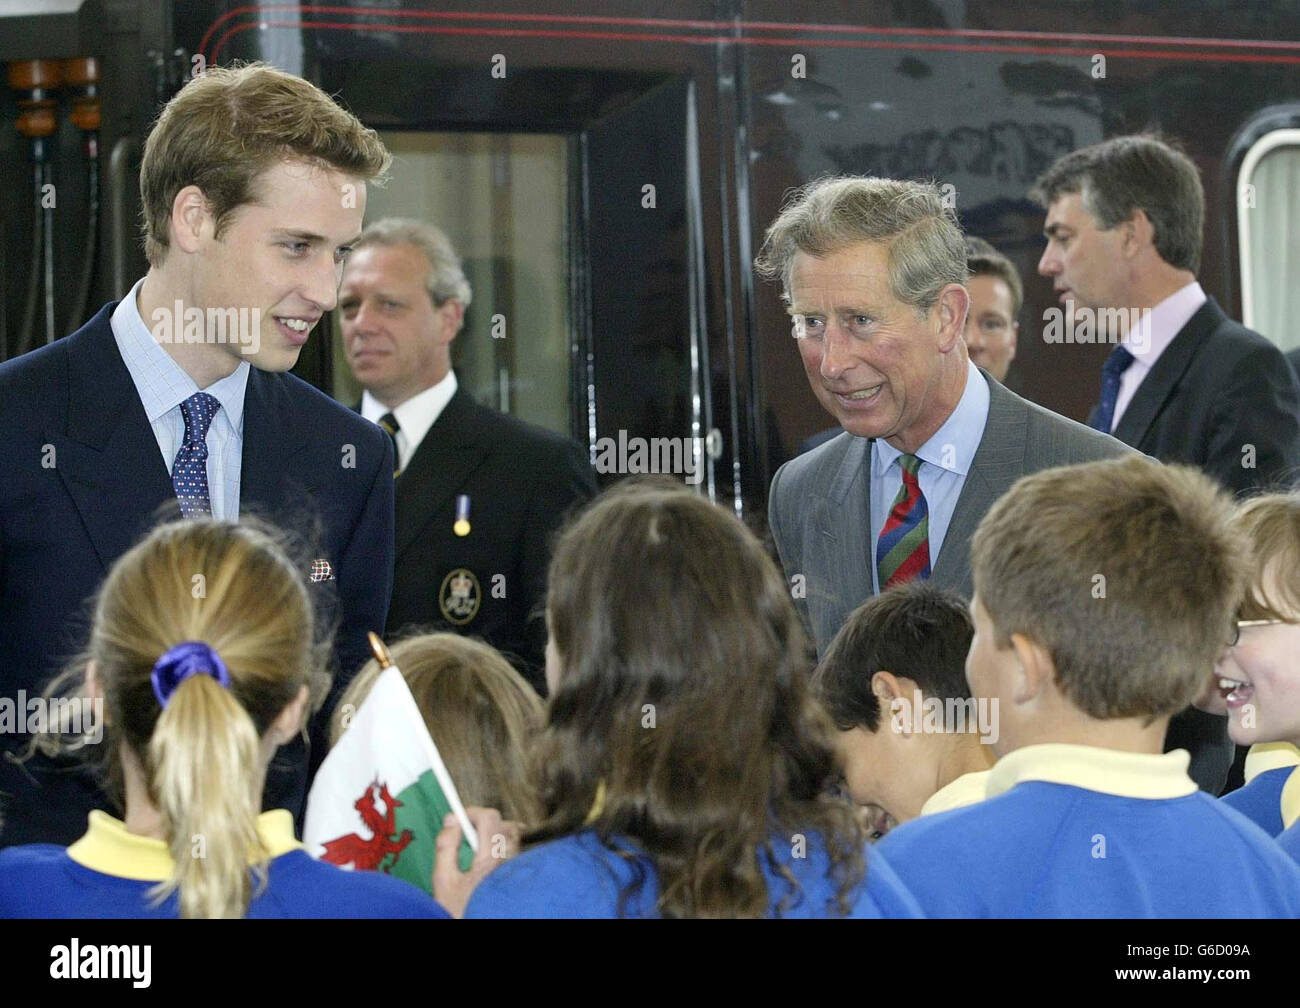 Prince William, and his father, Prince Charles, talk to wellwishers as they arrive at Bangor Station, for a visit to Wales in the run-up to his 21st birthday. * Two days before coming-of-age, William and his father were visiting the Anglesey Food Fair in north Wales and Newport Action for Single Homeless (NASH) in south Wales. Stock Photo